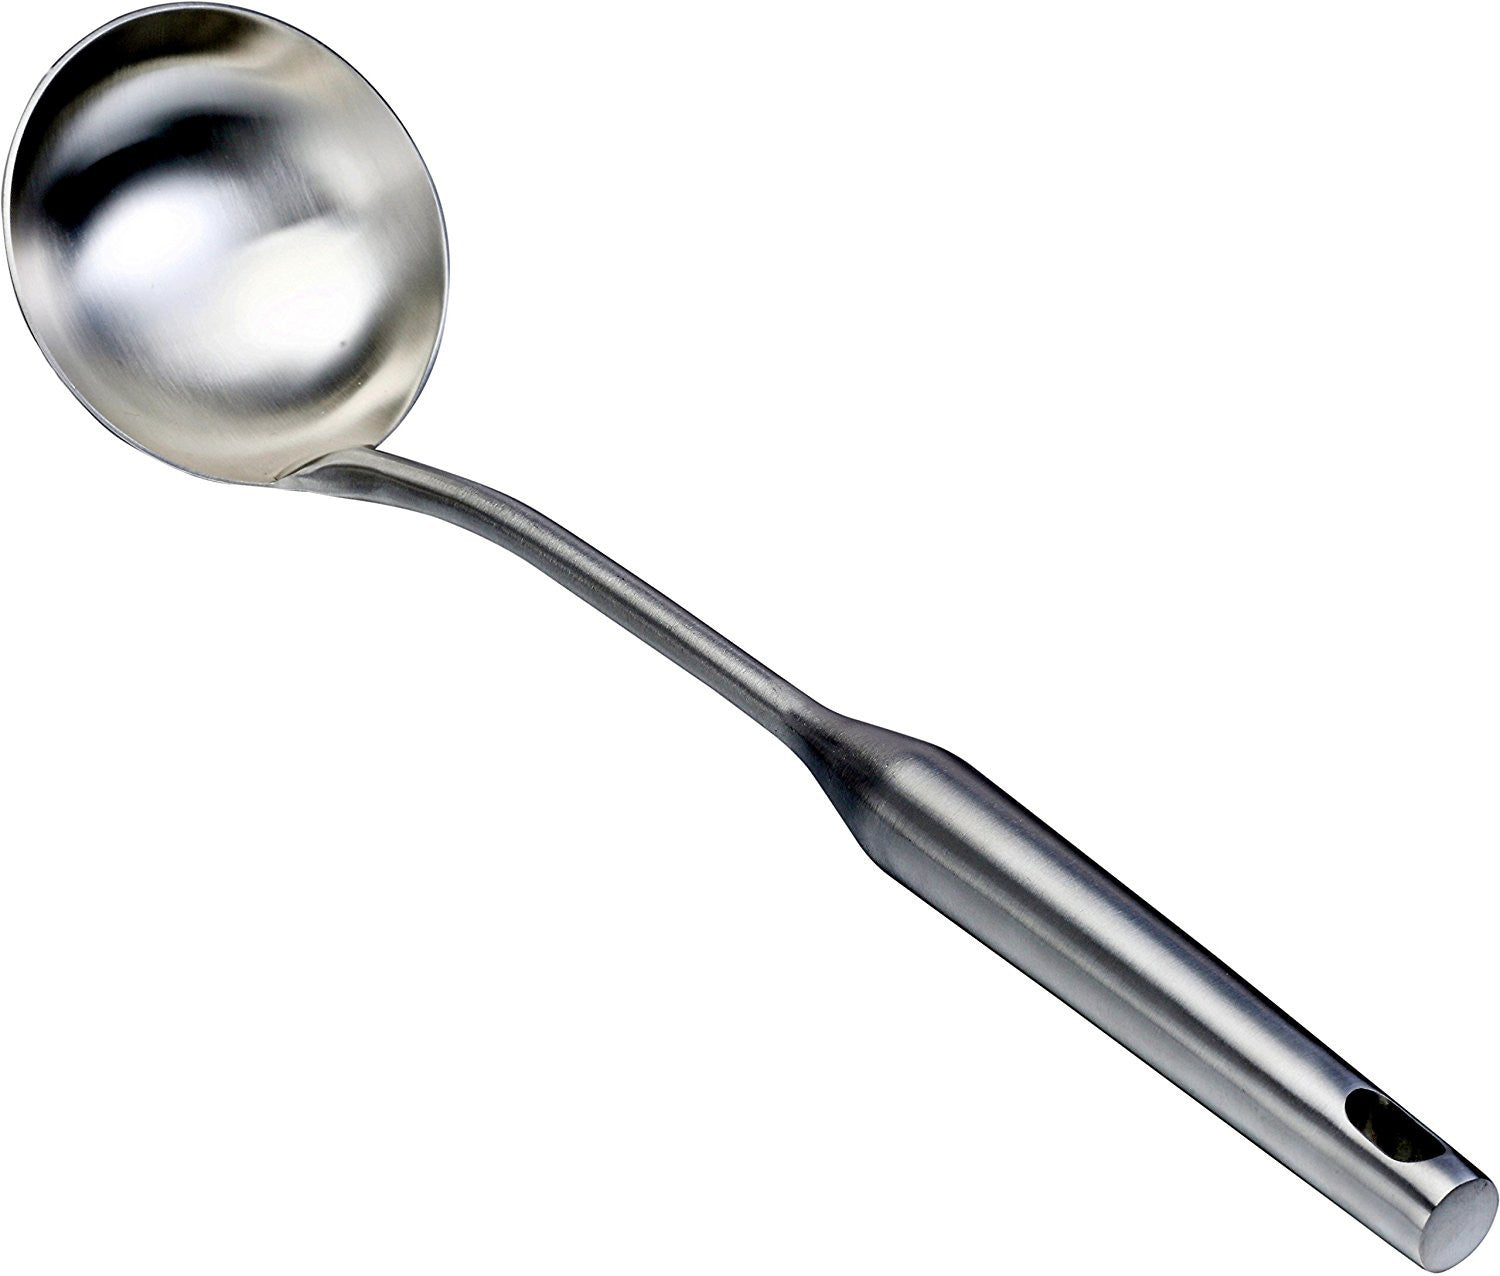 Large Soup Ladle - Flatware Soup Ladles To Serve Soups And Sauces - Canning  Ladel Cup - Heavy Duty Commercial Restaurant Quality Dishwasher Safe  Stainless Steel Serving Utensil by Pro Chef Kitchen